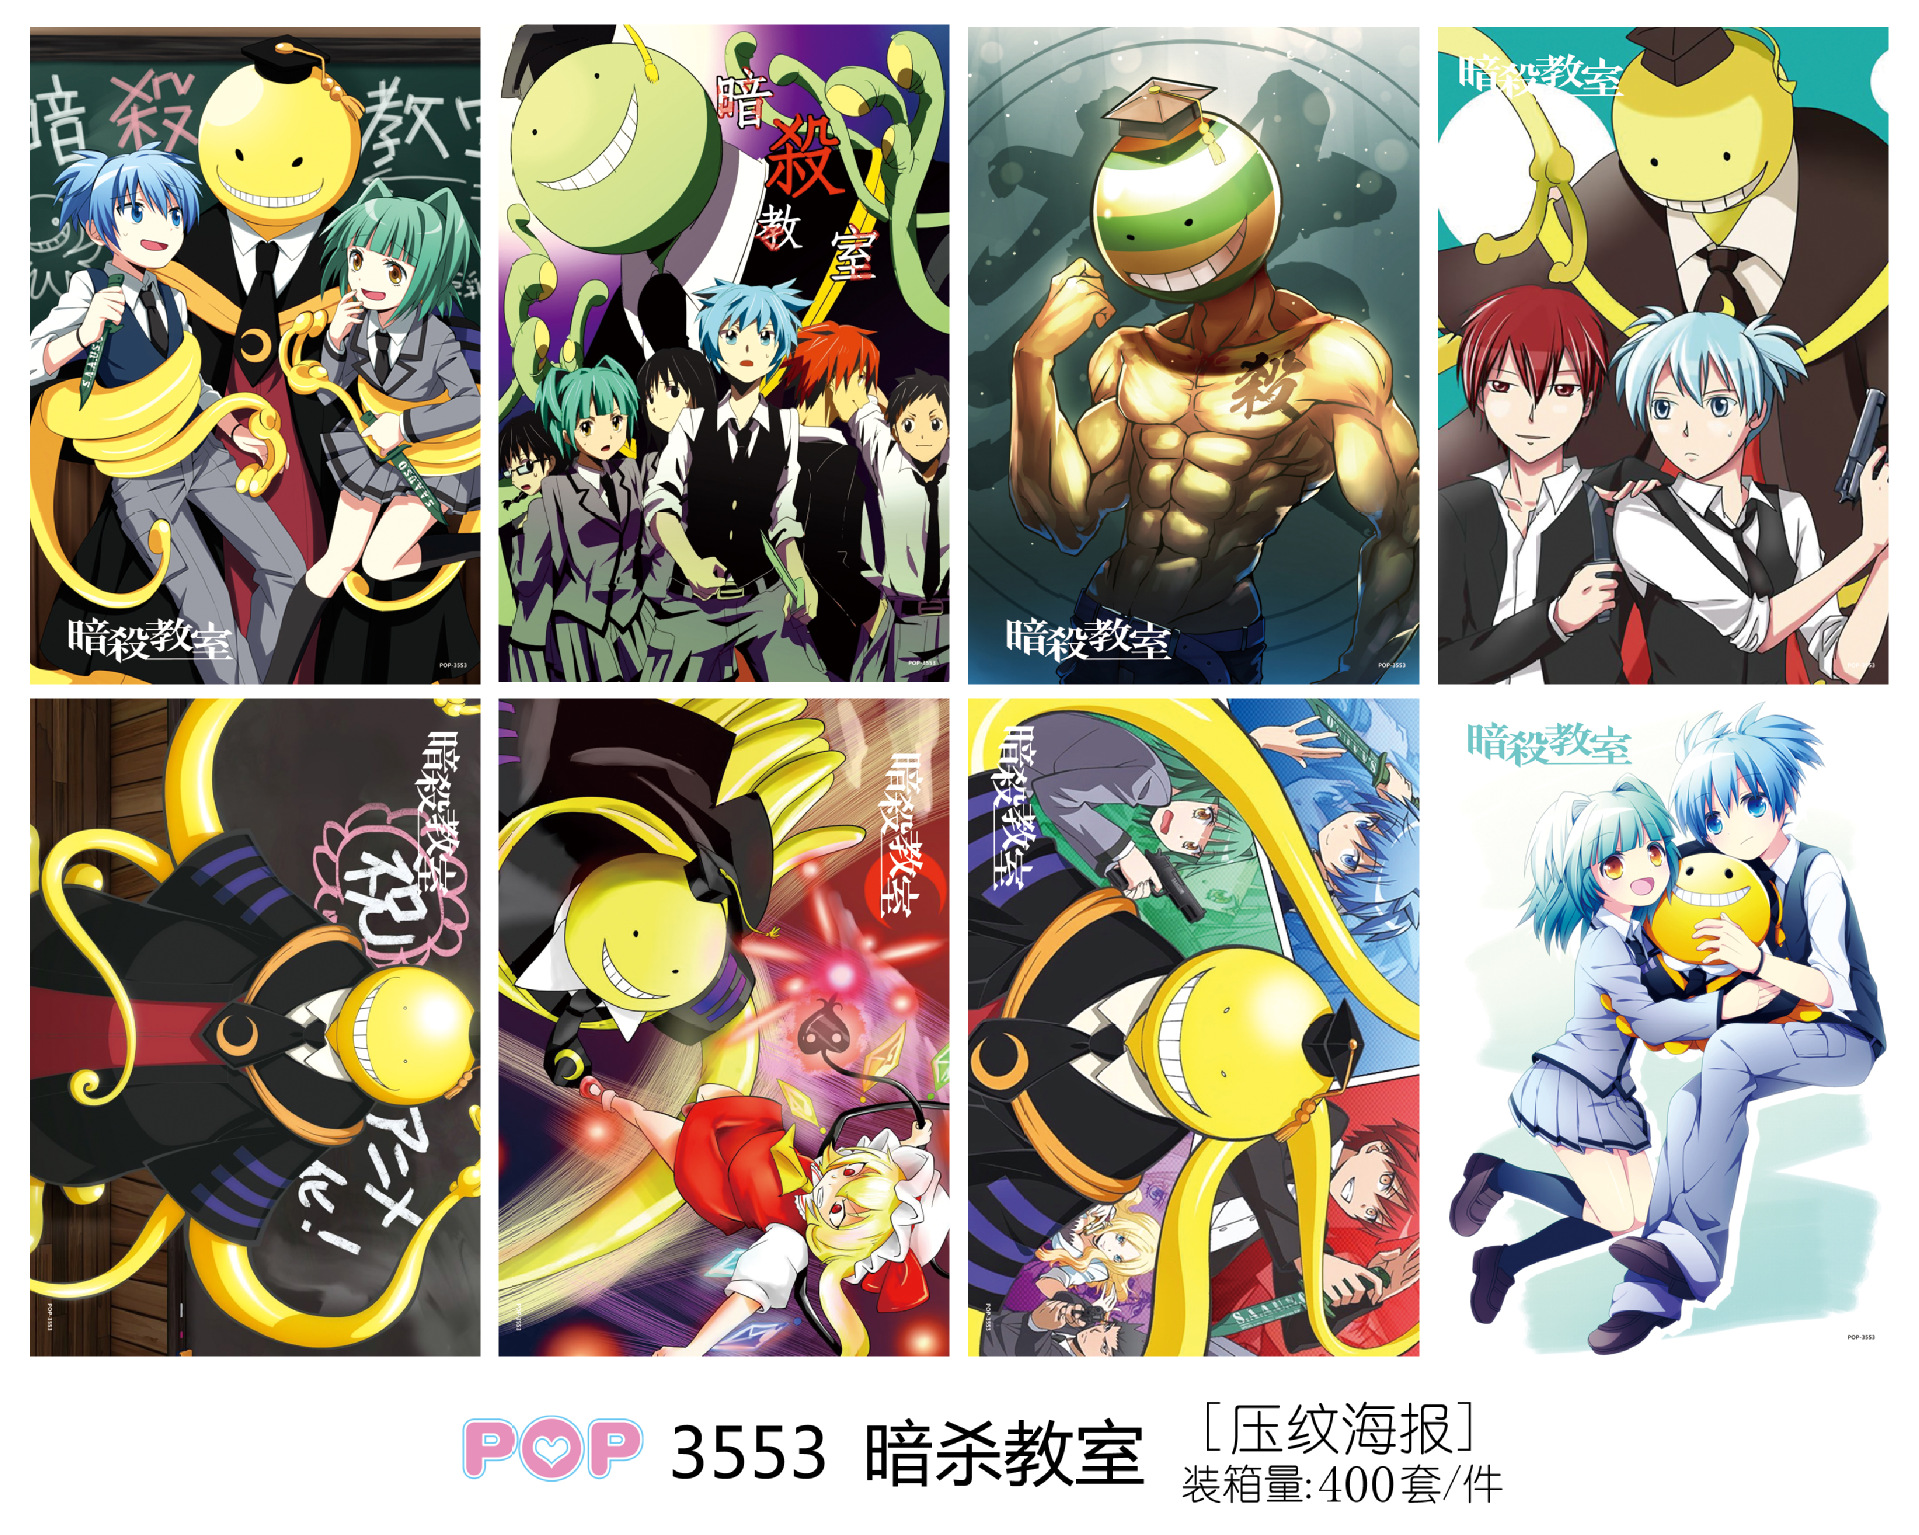 Assassination Classroom anime poster price for a set of 8 pcs